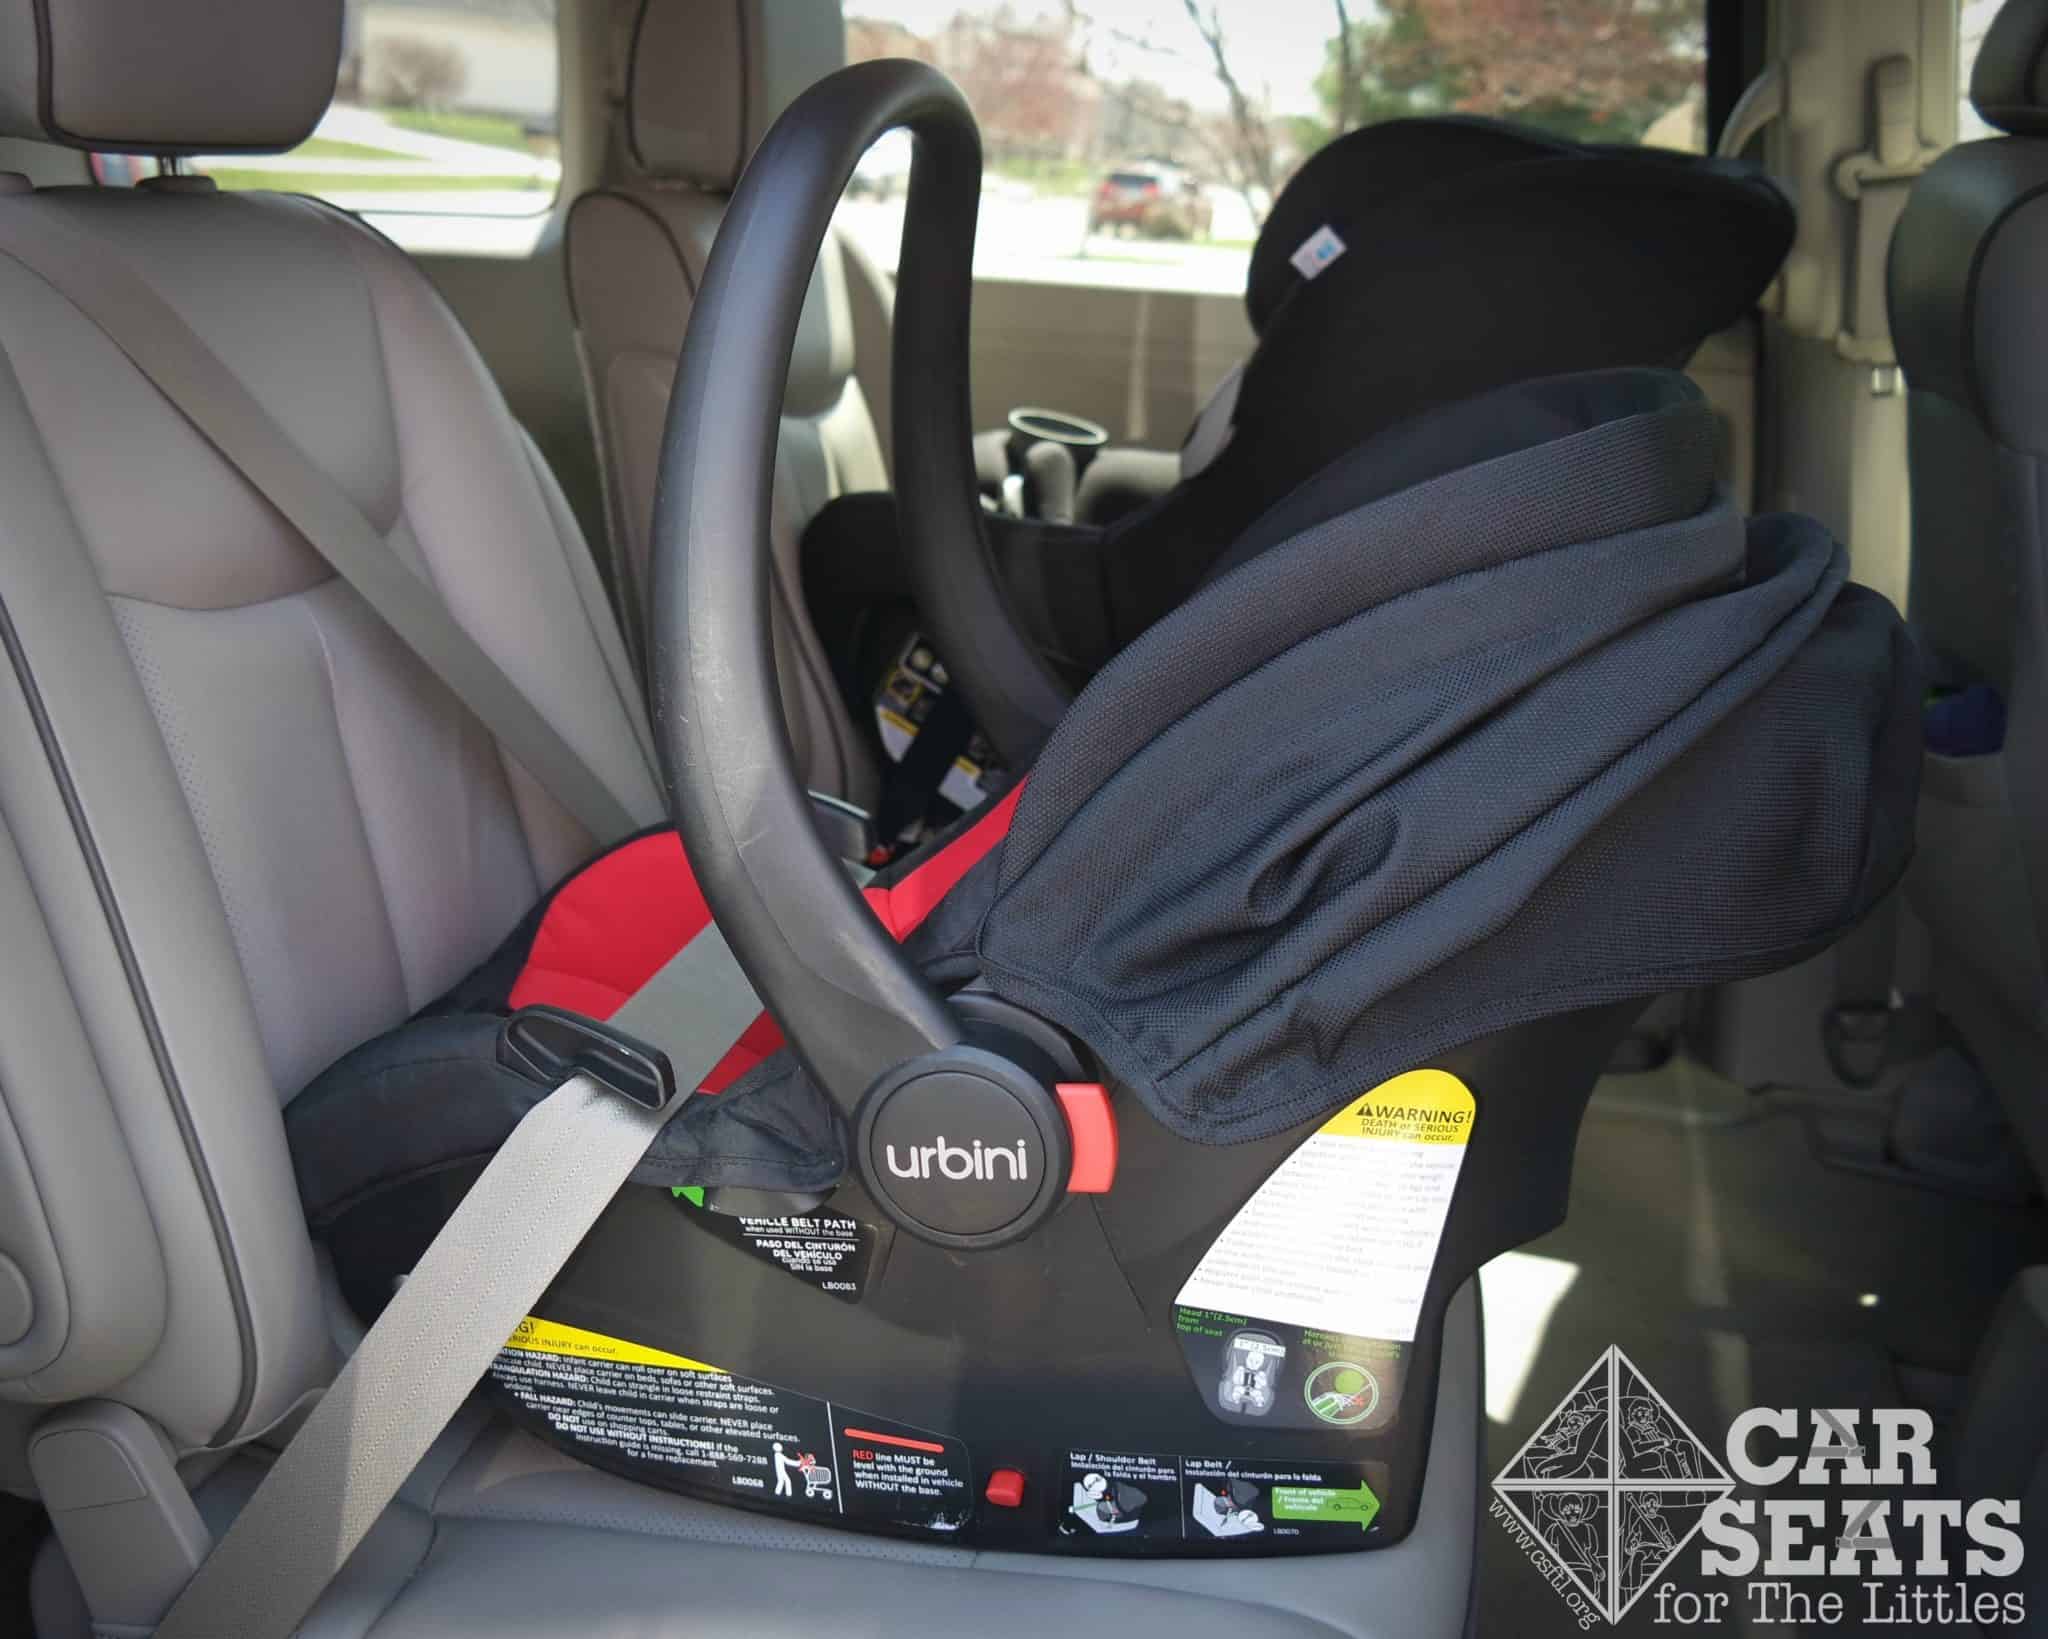 Rear Facing Only Seat Without The Base, How To Install Infant Car Seat With Belt Without Baseboard